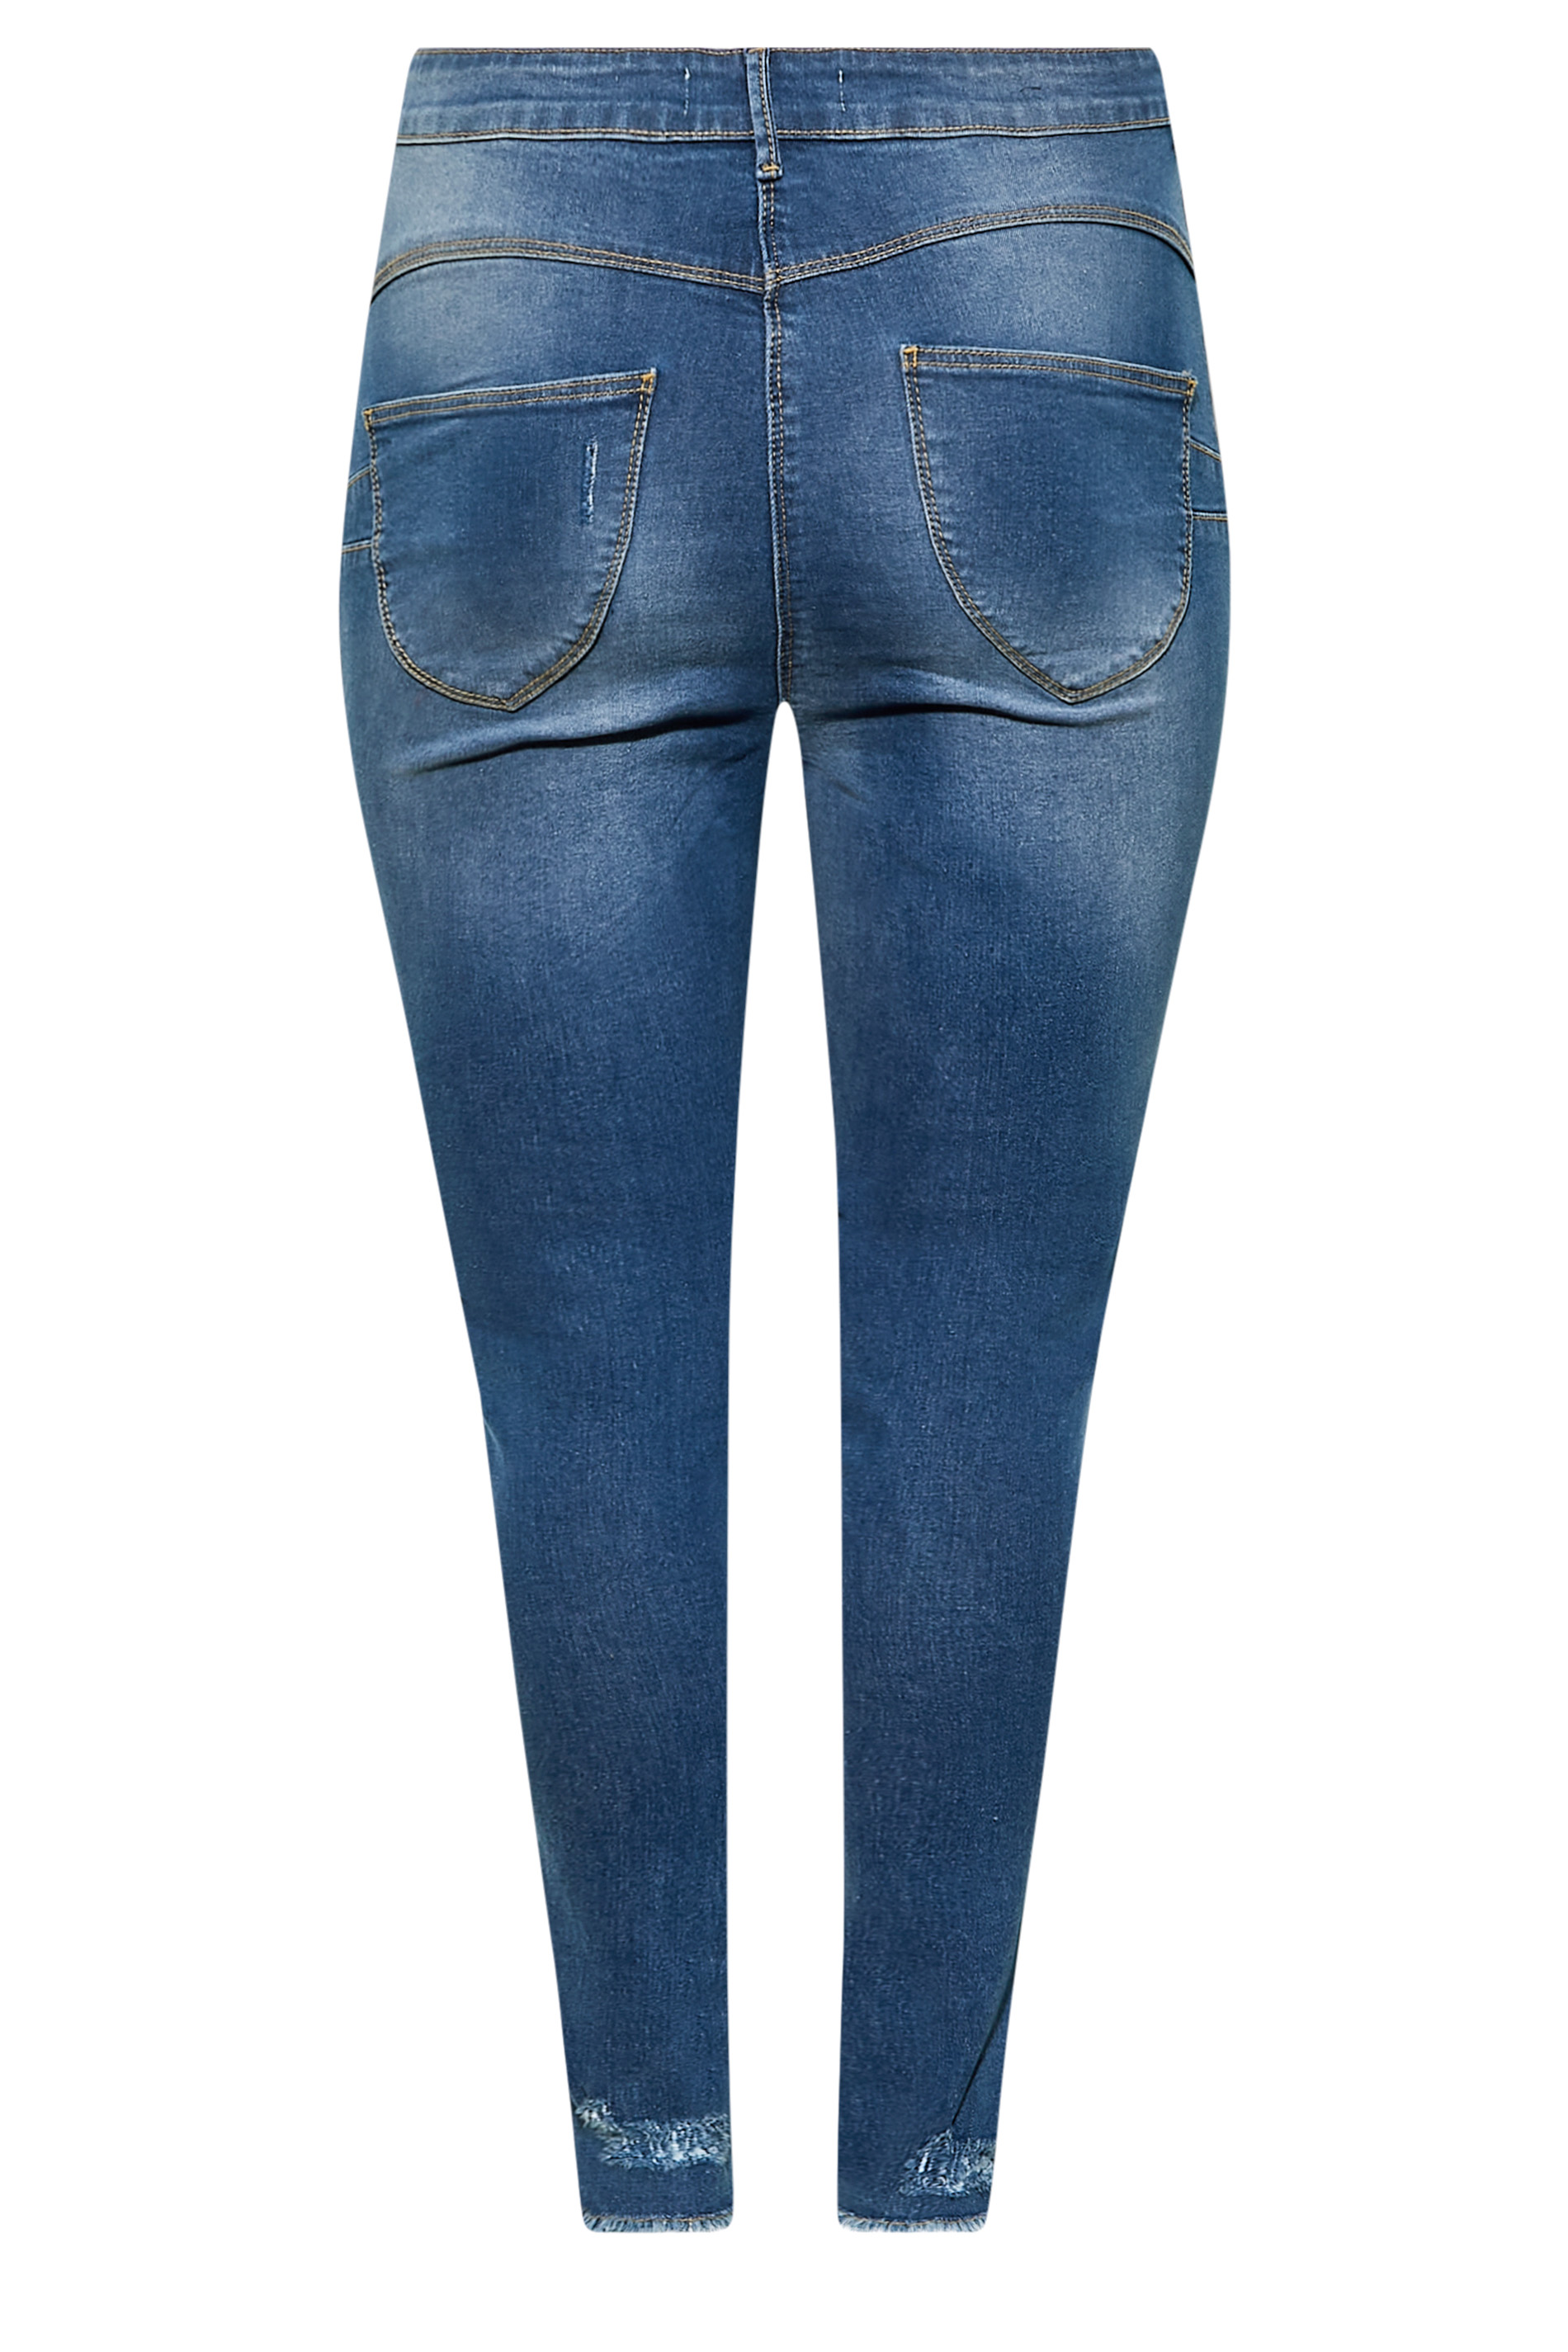 Plus Size Blue Distressed AVA Lift and Shape Skinny Jeans